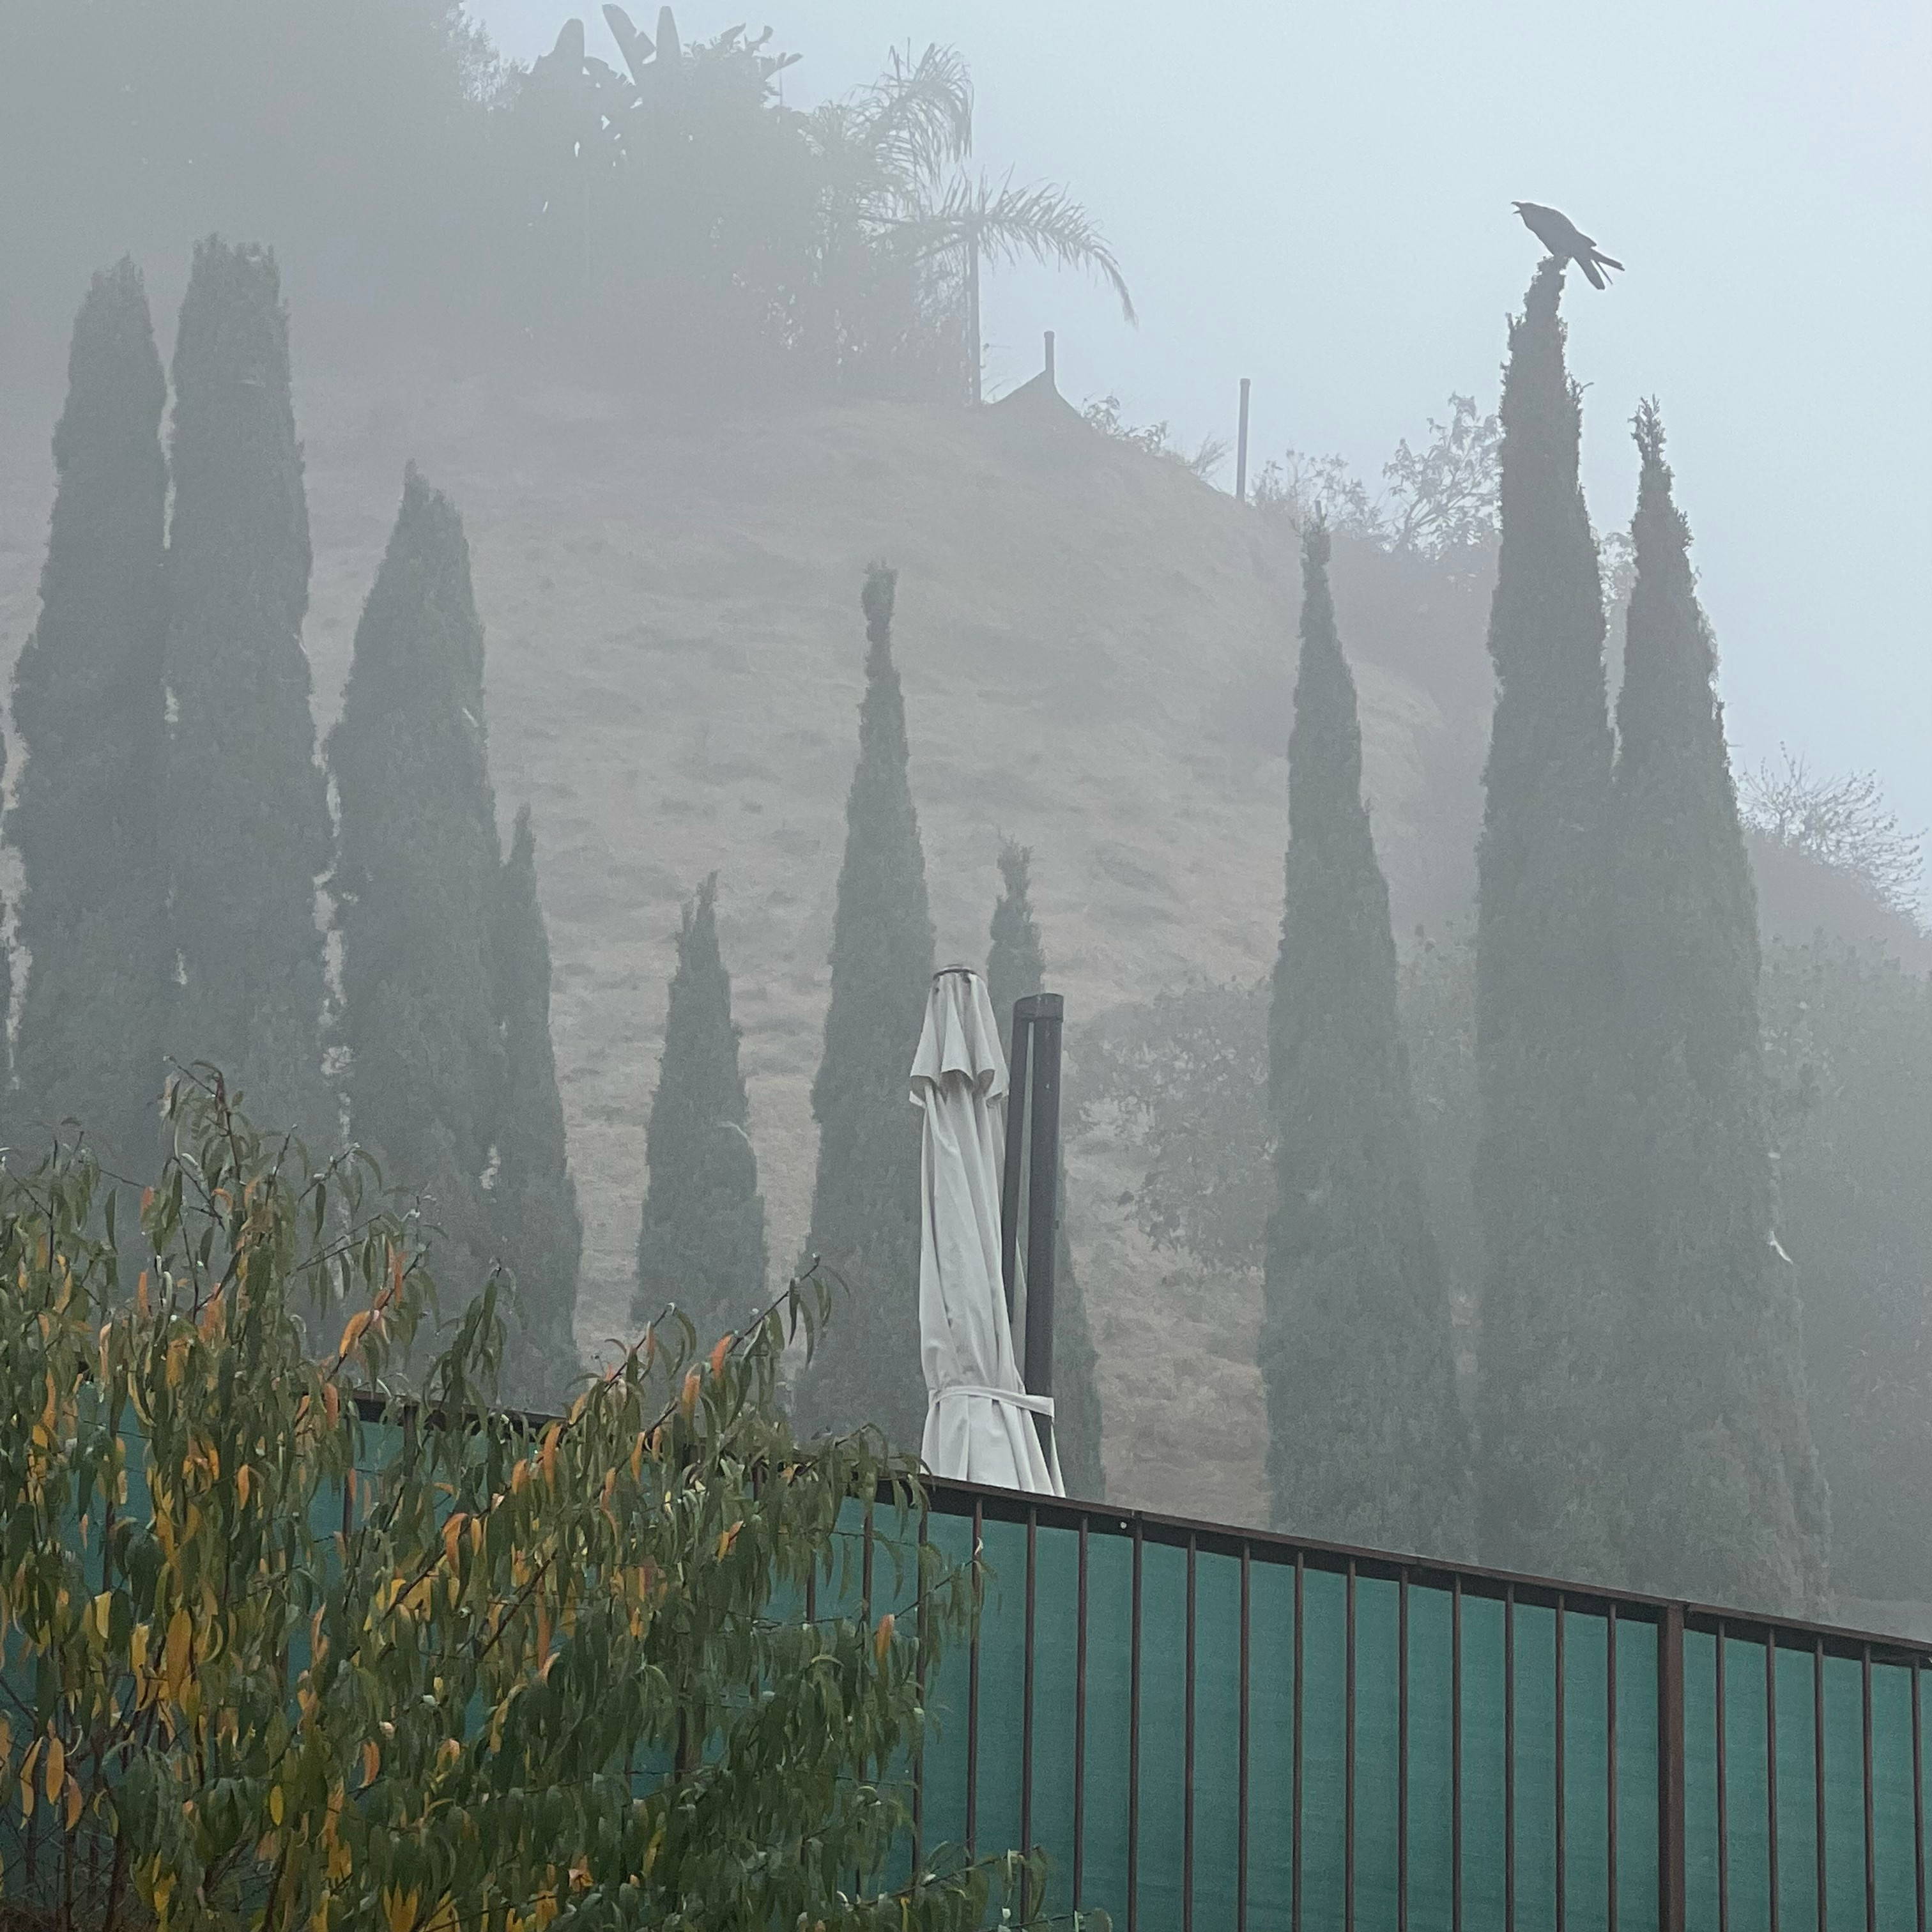 Photograph of crows in the Hollywood Hills